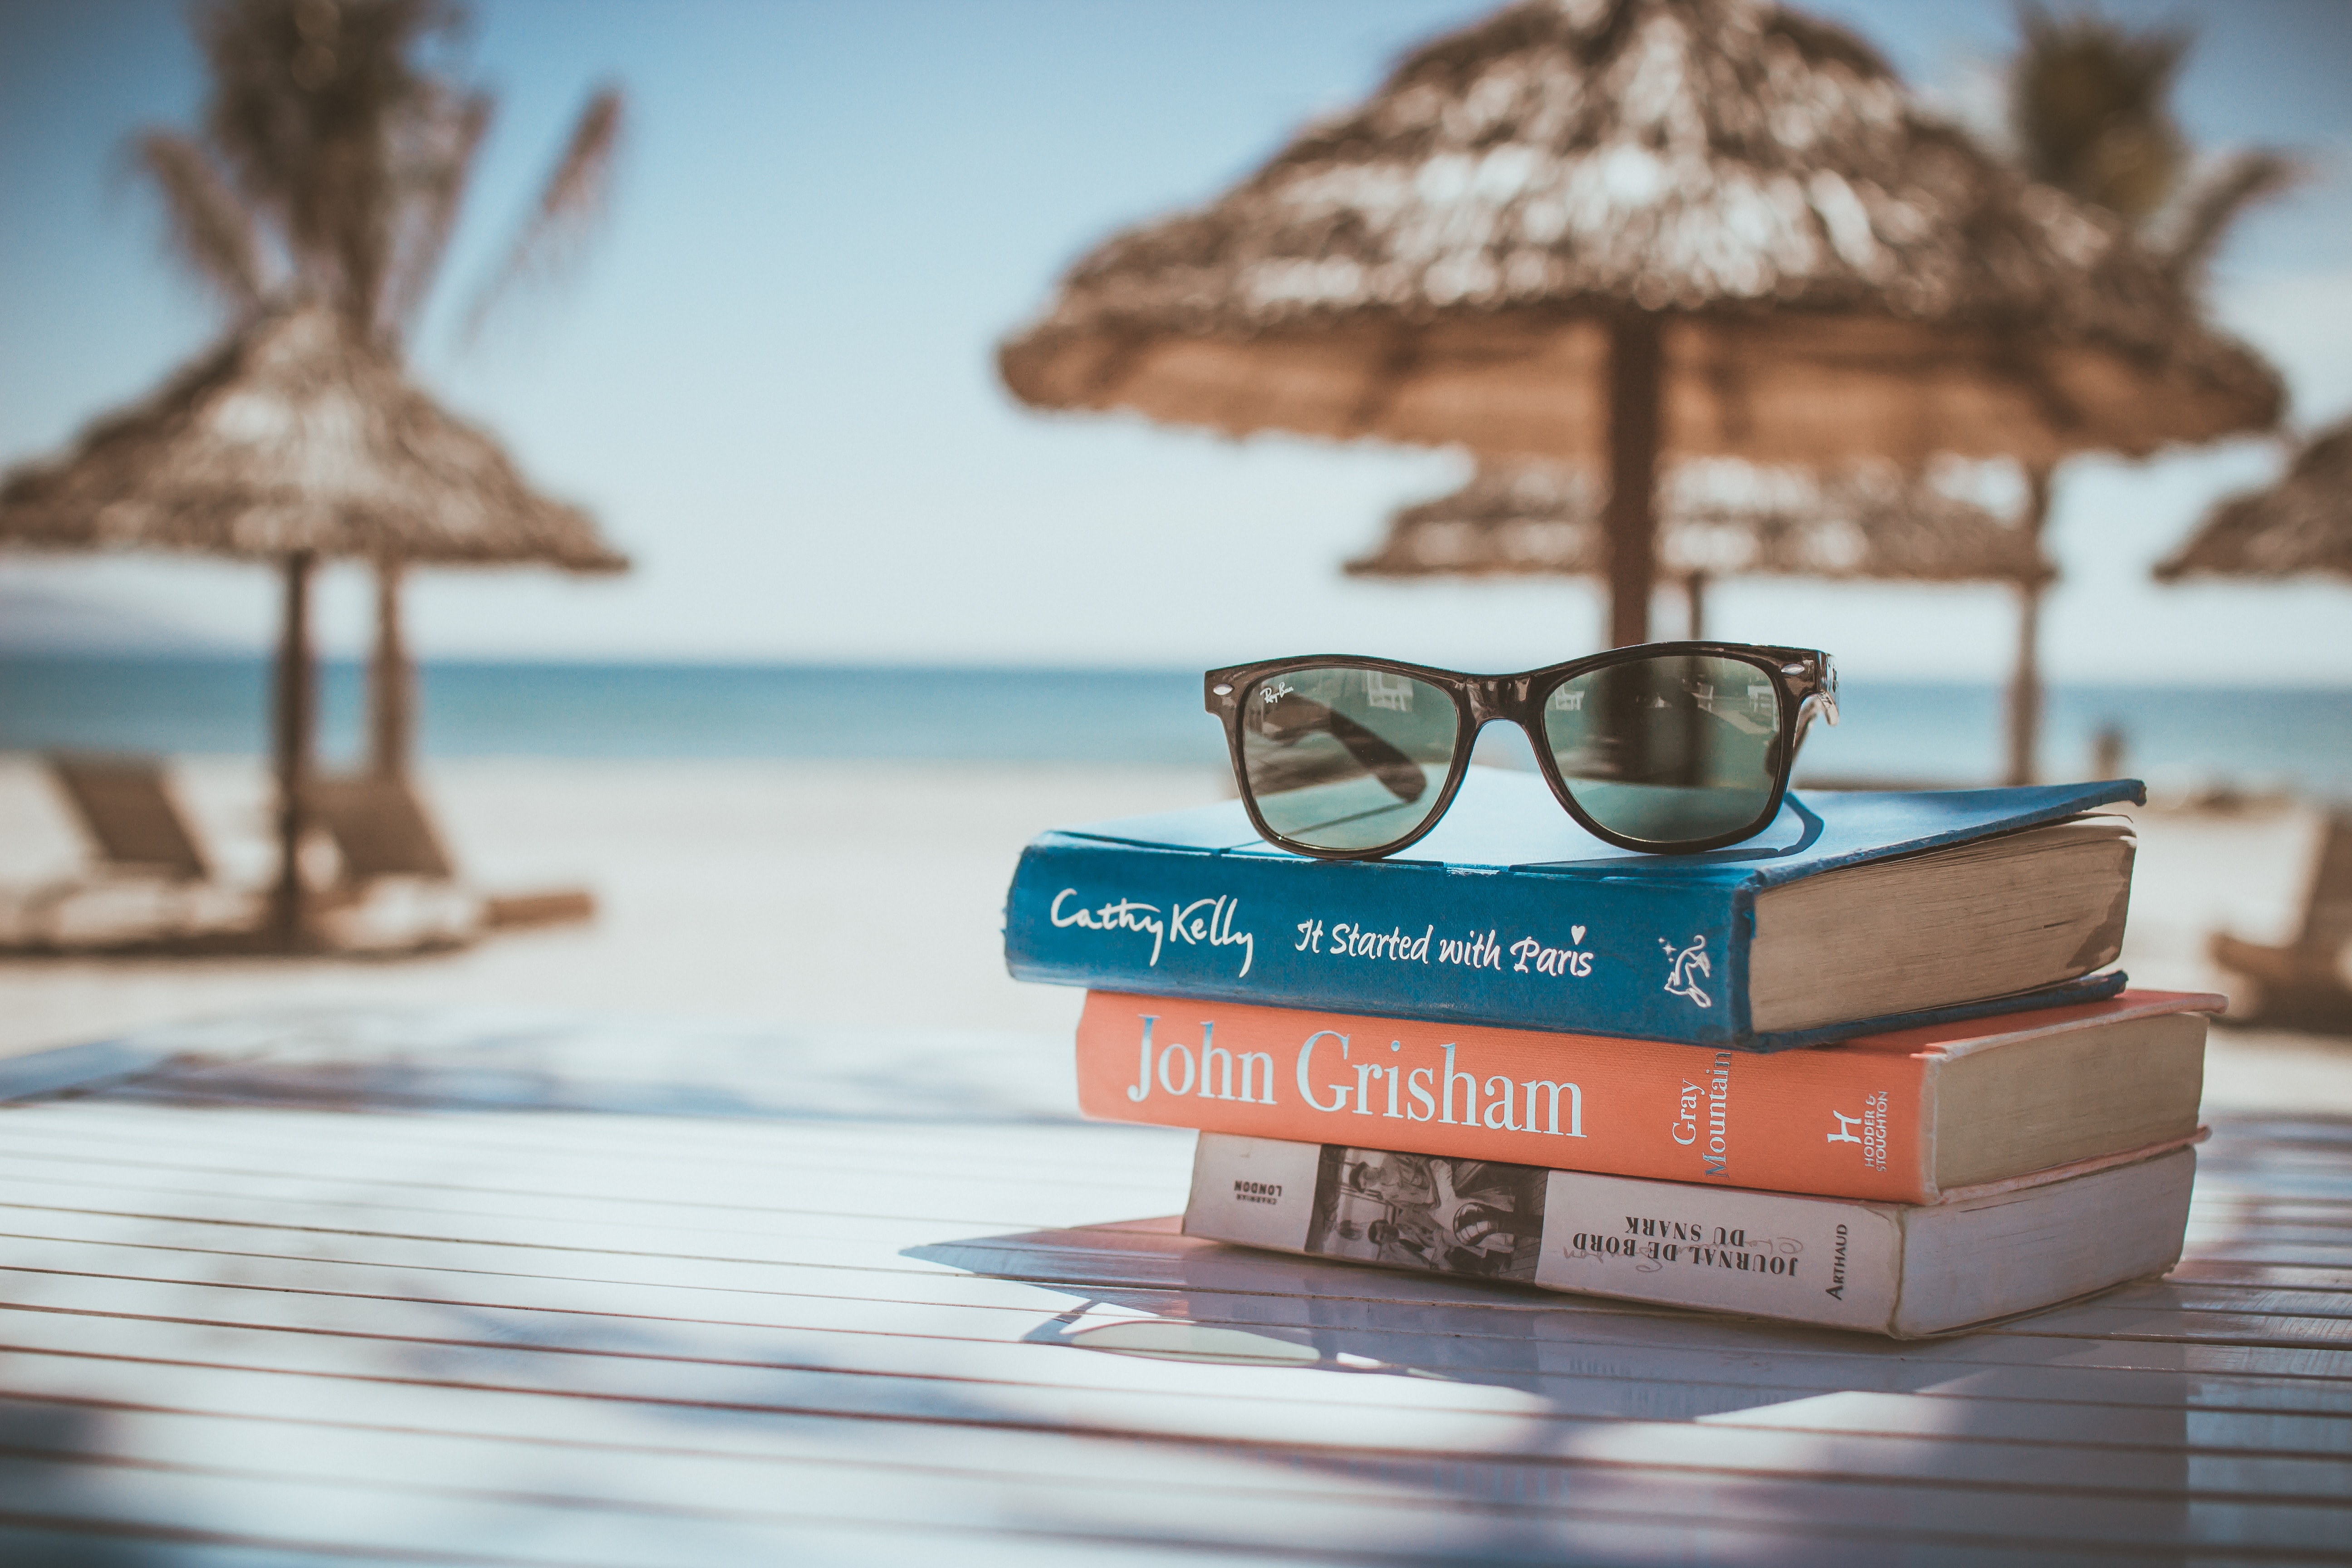 Sunglasses on a book stack | Turning Vacay Dreams Into A Reality | Backpacking with Bacon